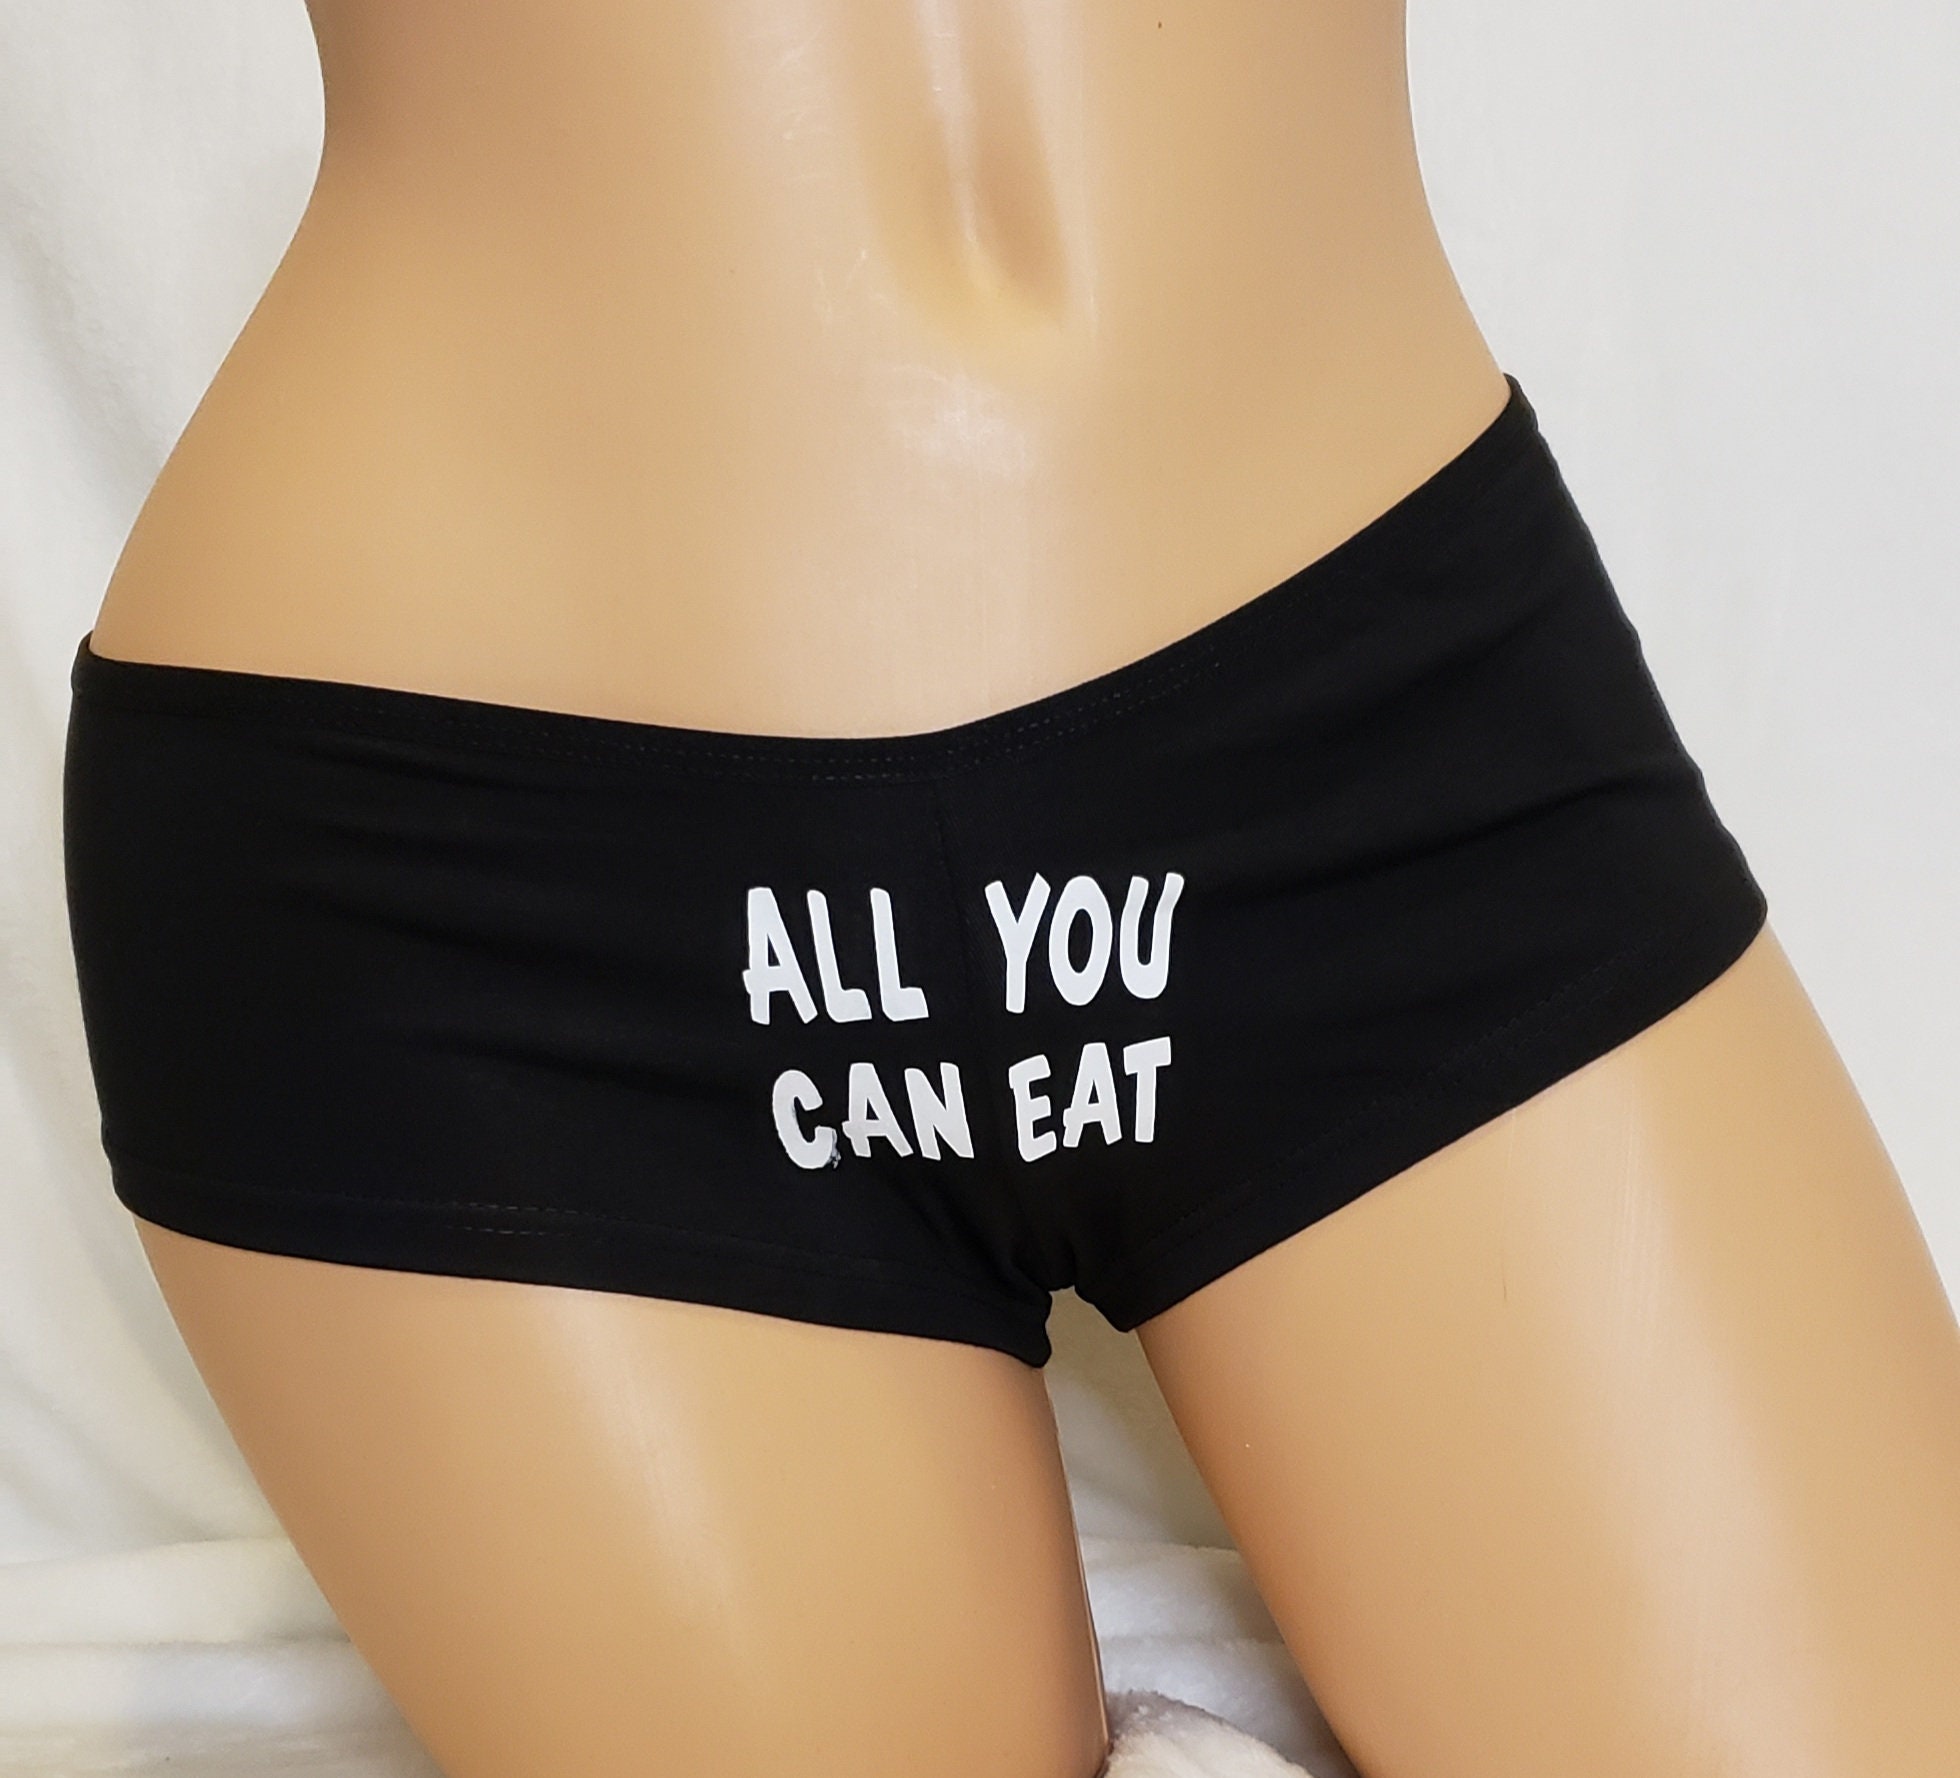 All You Can Eat Panties - Buy All You Can Eat Panties - Etsy